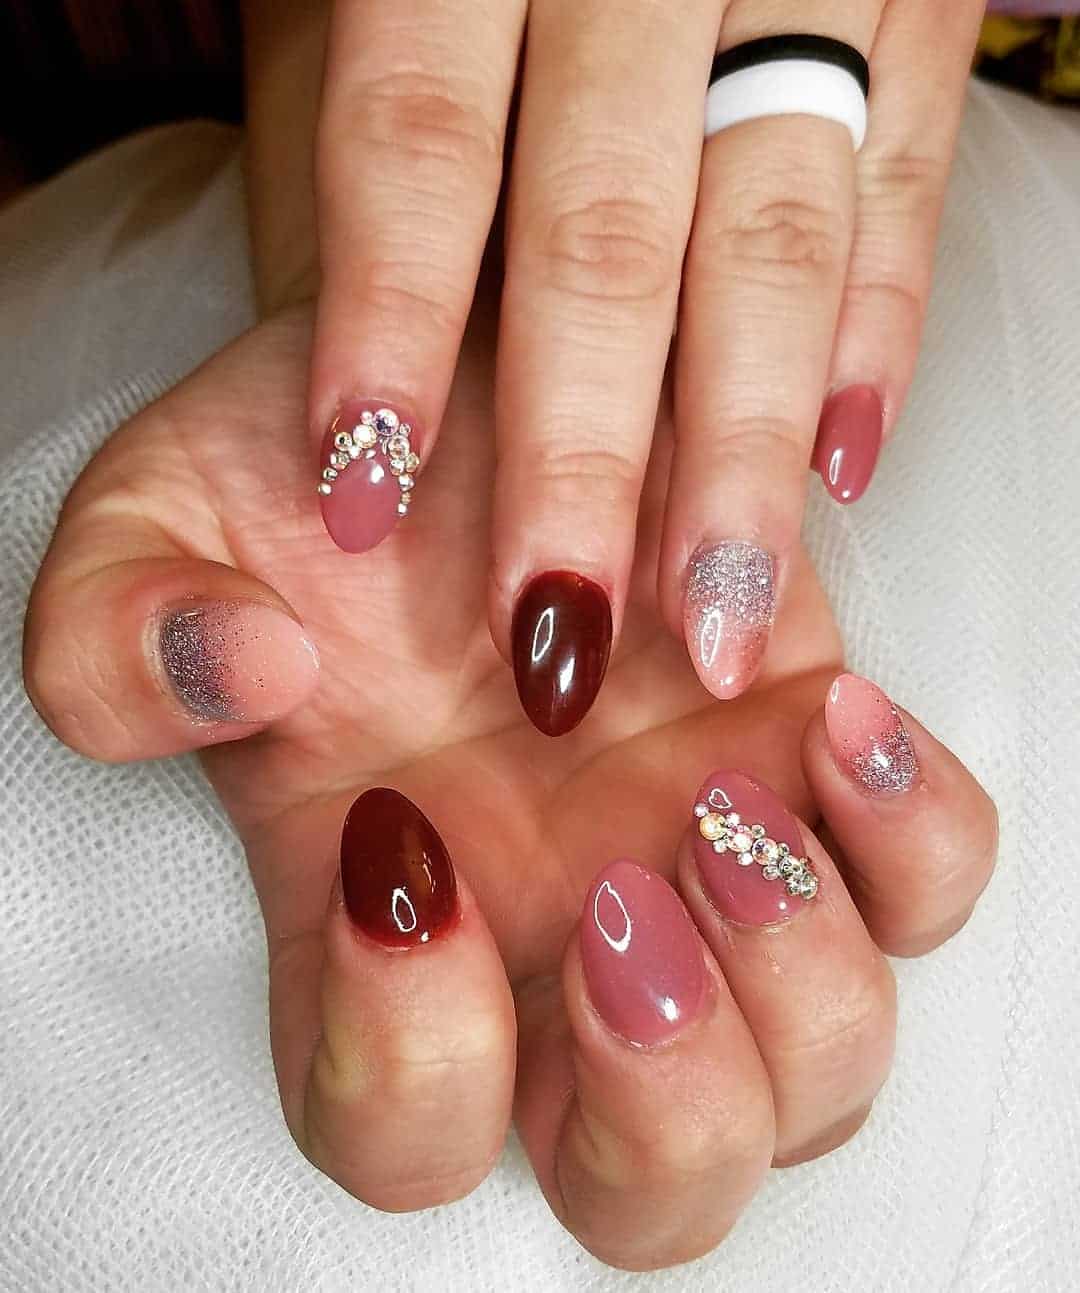 Almond Nails with The Rhinestones